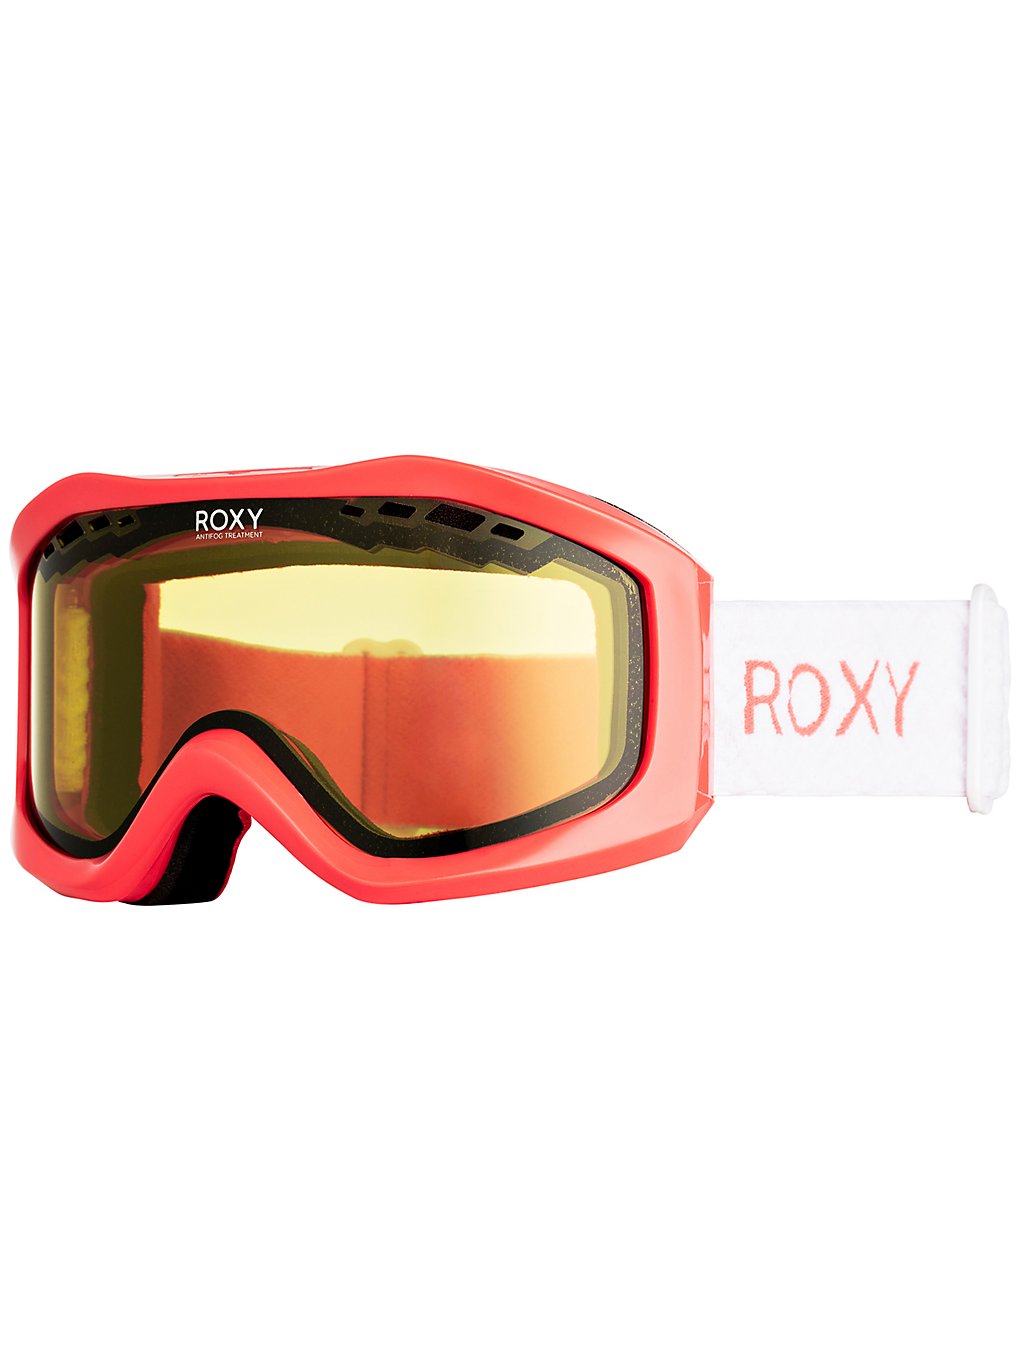 Roxy sunset bad weather living coral oranssi, roxy